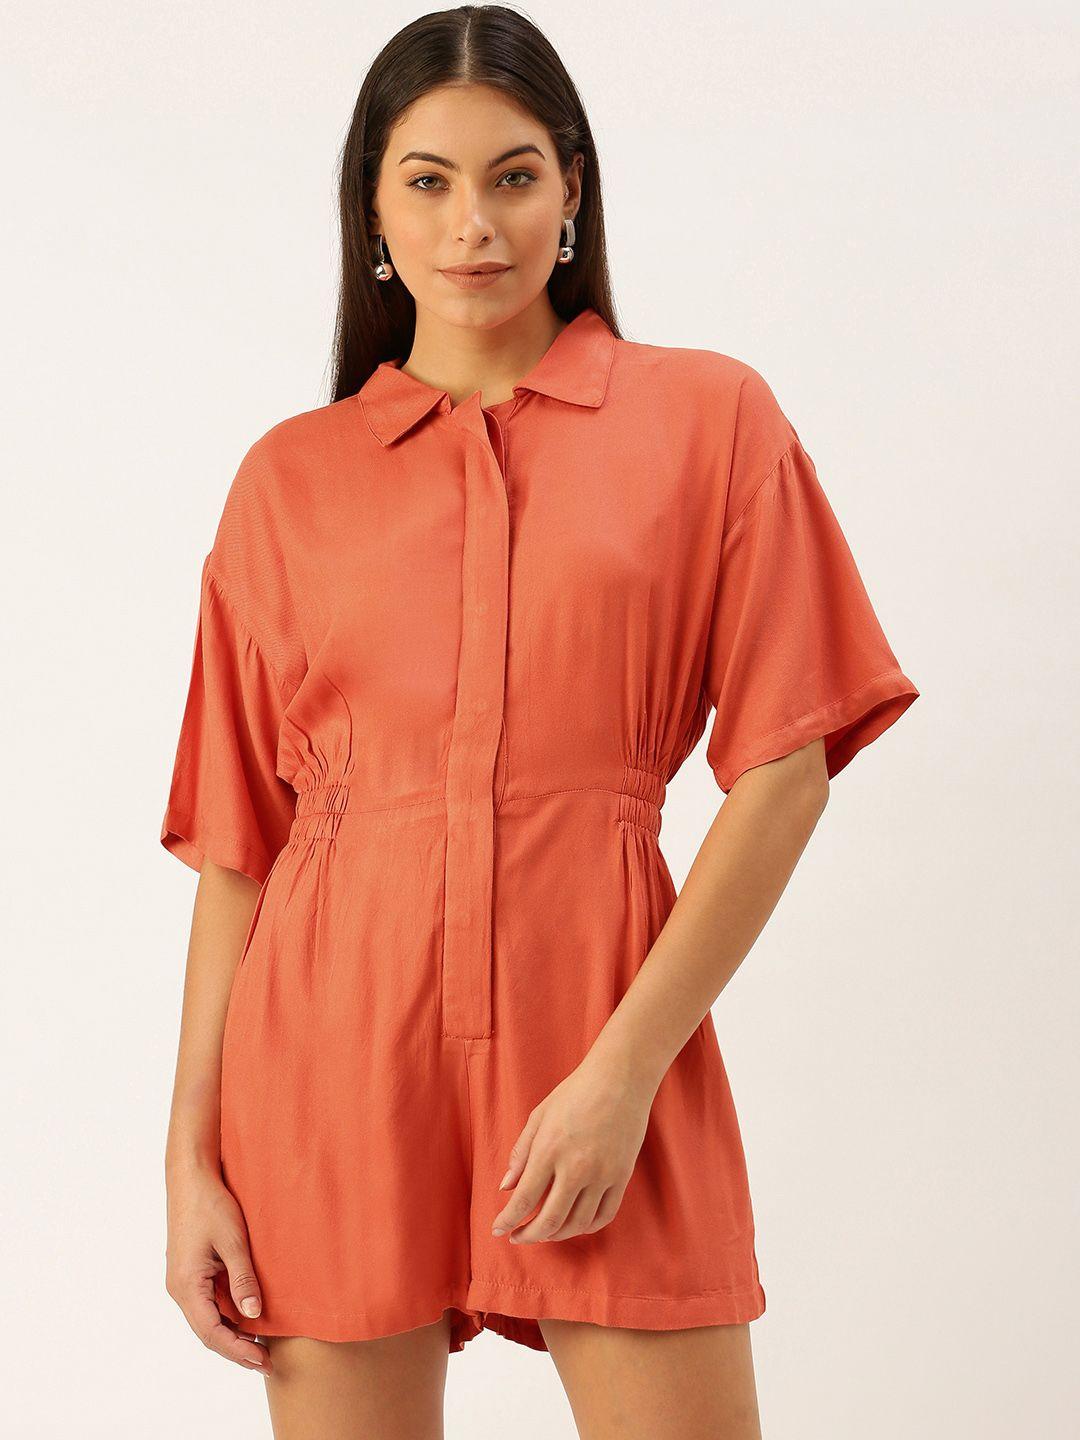 forever 21 women coral red solid shirt-collar playsuit